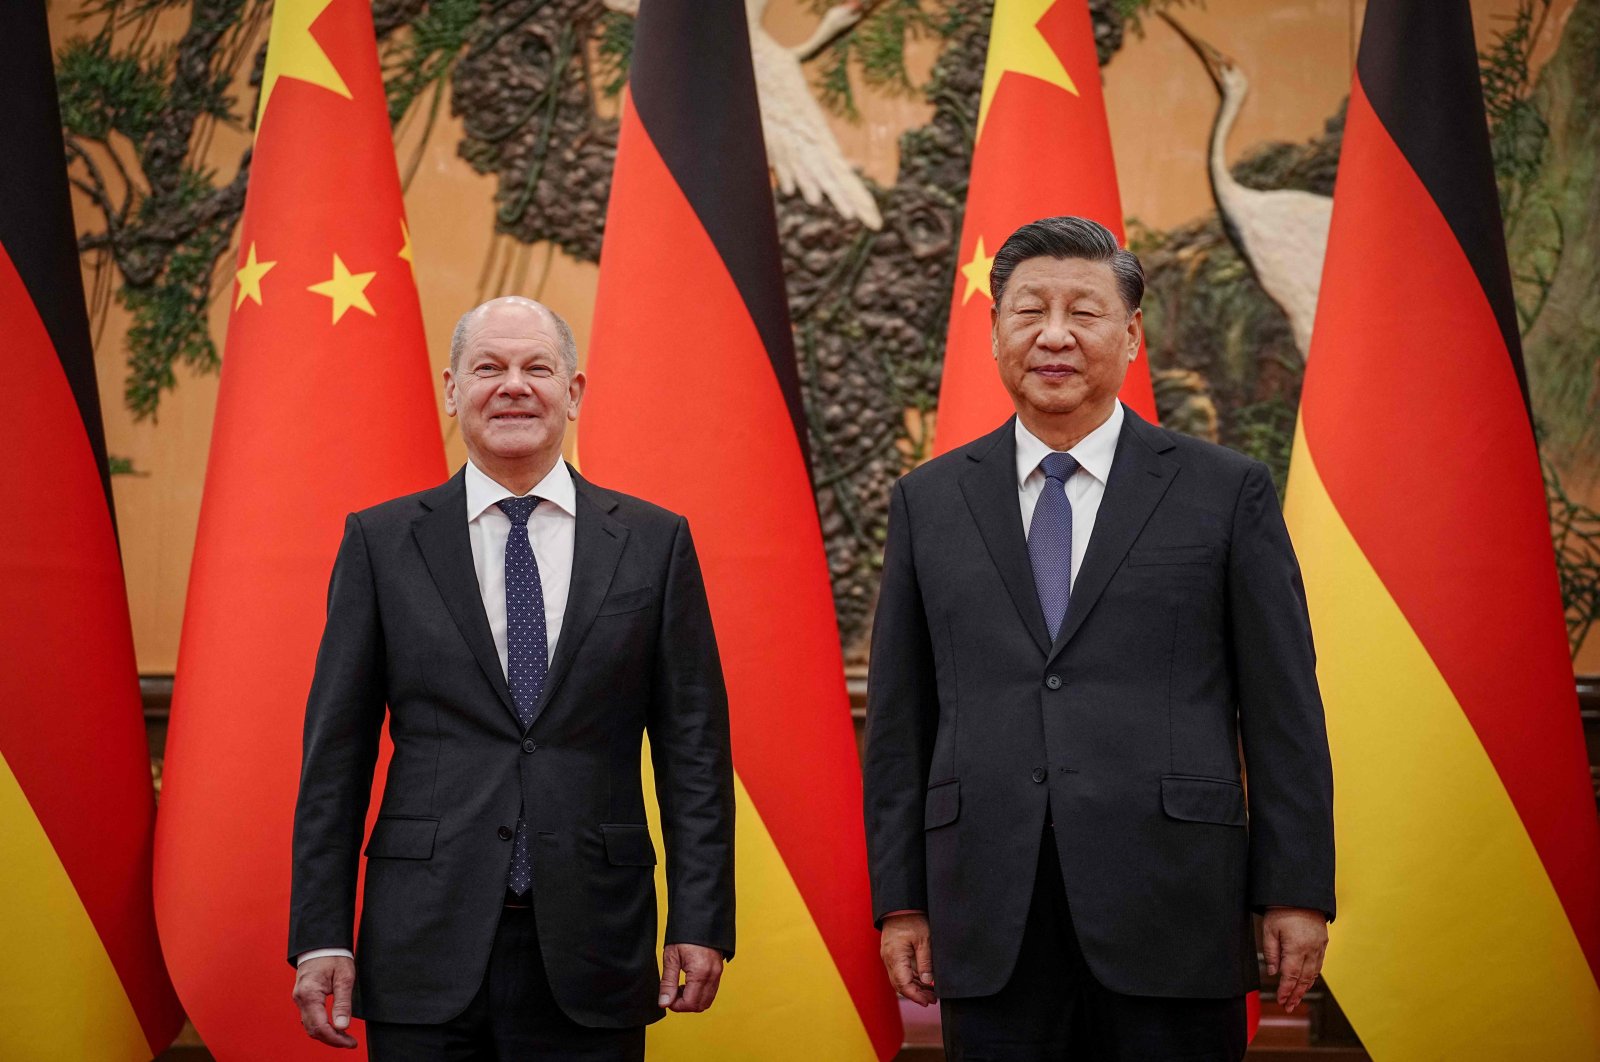 Chinese President Xi Jinping (R) welcomes German Chancellor Olaf Scholz at the Grand Hall, Beijing, China, Nov. 4, 2022. (AFP Photo)